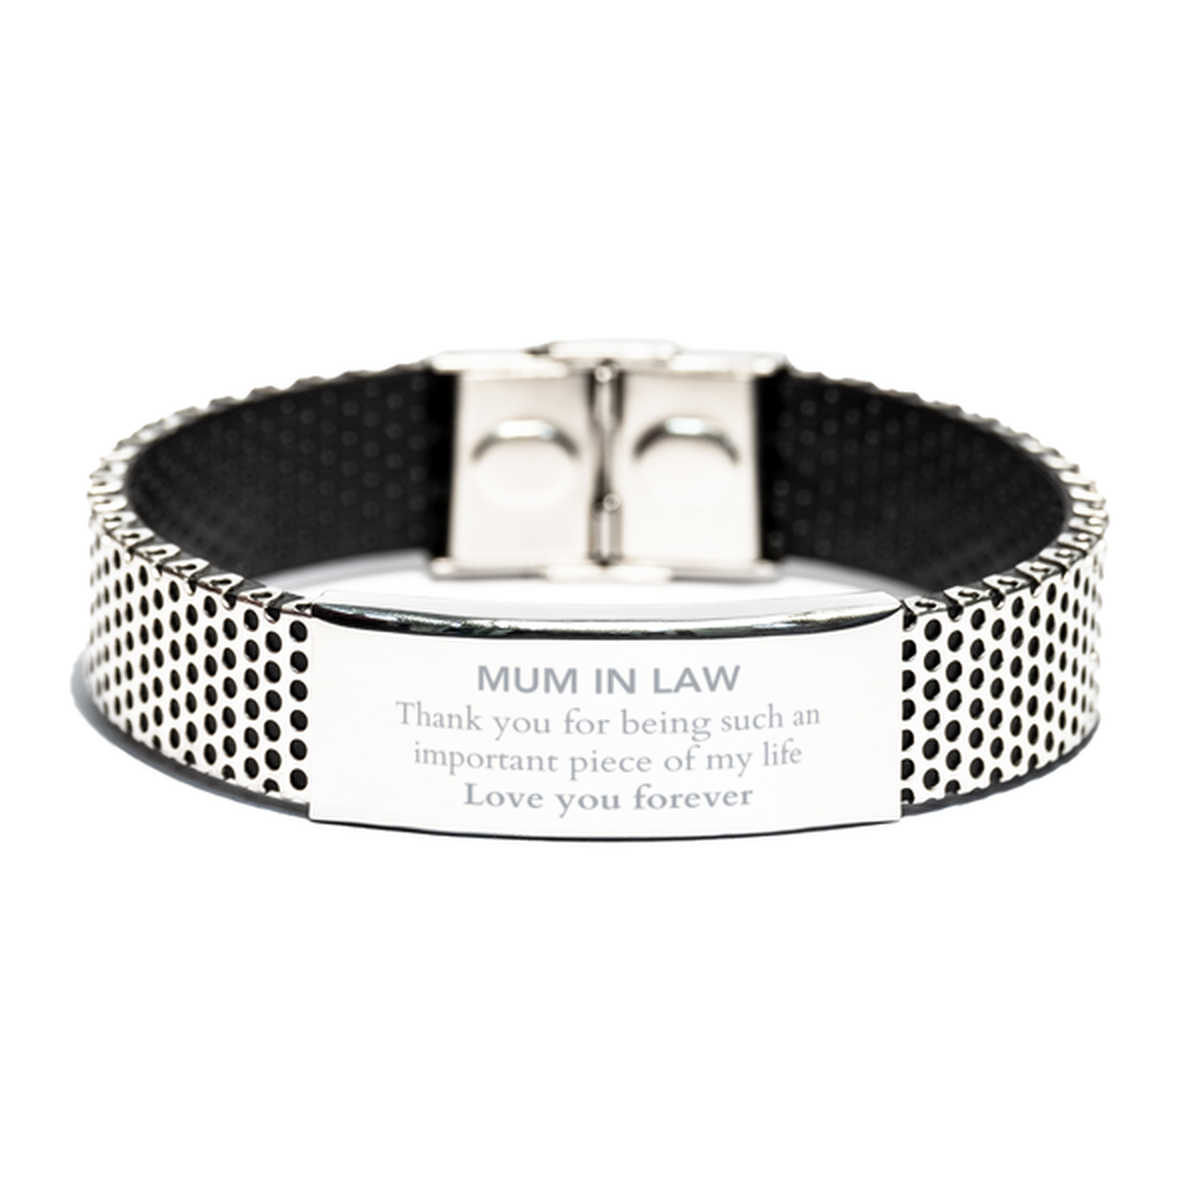 Appropriate Mum In Law  Stainless Steel Bracelet Epic Birthday Gifts for Mum In Law  Thank you for being such an important piece of my life Mum In Law  Christmas Mothers Fathers Day